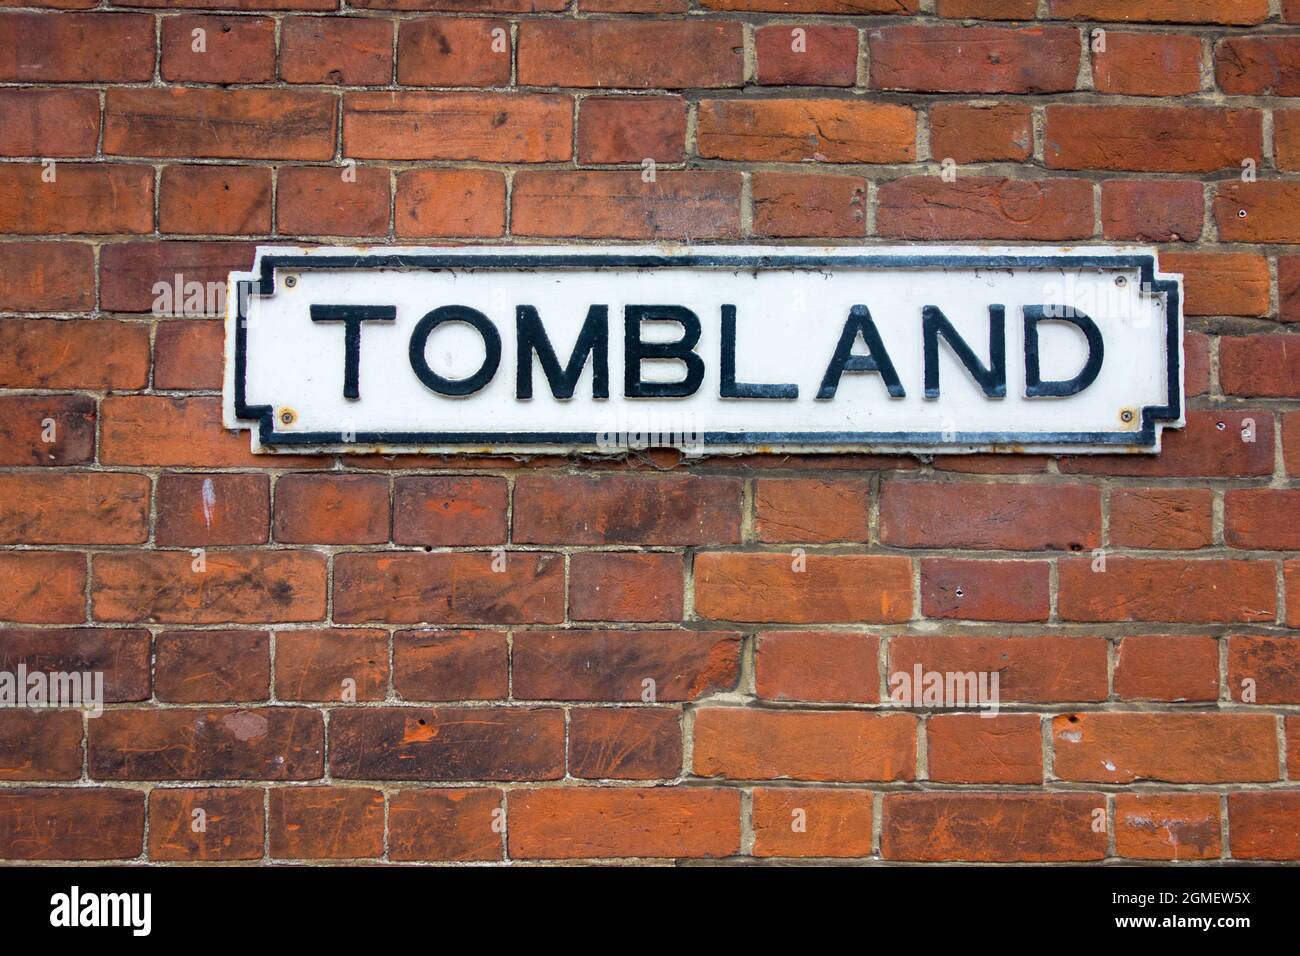 Cast iron Tombland street sign in Norwich UK Stock Photo